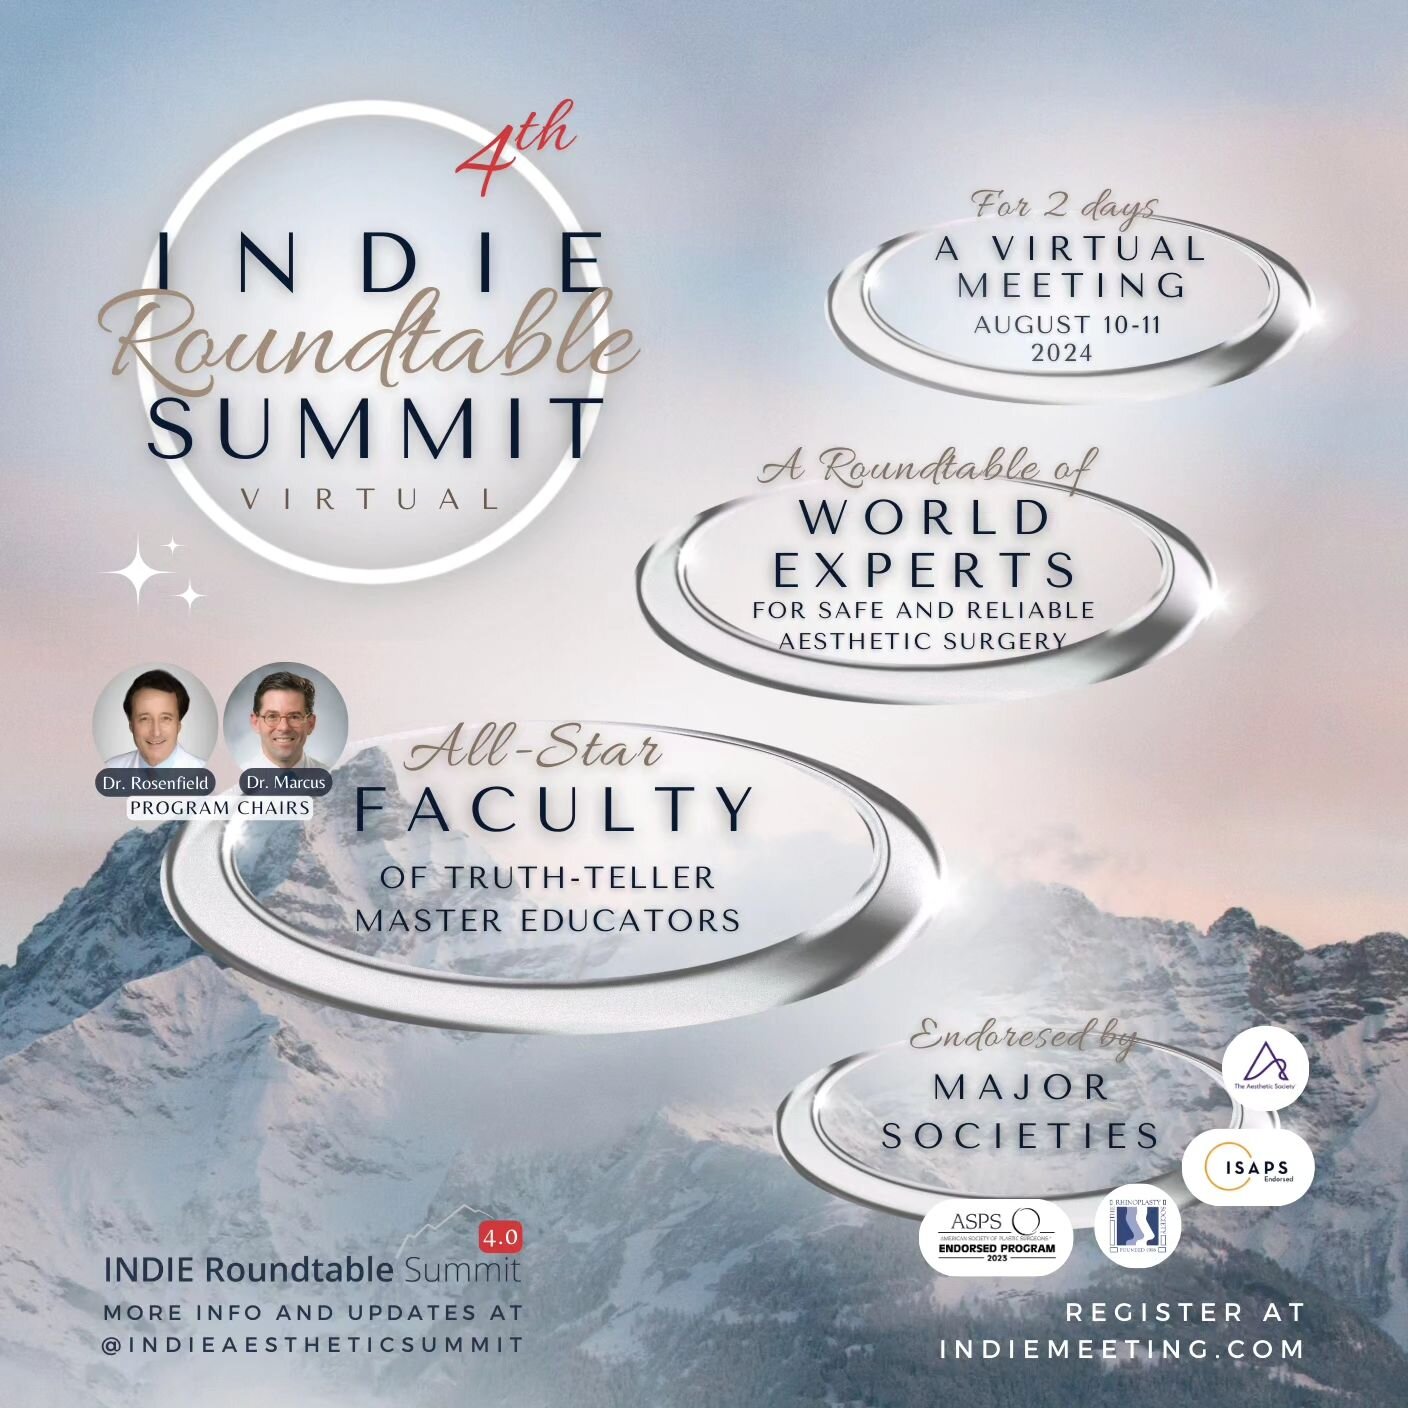 &bull; Indie Roundtable Summit &bull;

⚪️A Roundtable for Safe and Predictable Surgery⚪️

More Pearls - Less Puff
Surgery Simplified &amp; Safetyized

➰For the 4️⃣th consecutive year
🗓August 10-11th, 2024
📍A virtual event, with on-site faculty

✨No